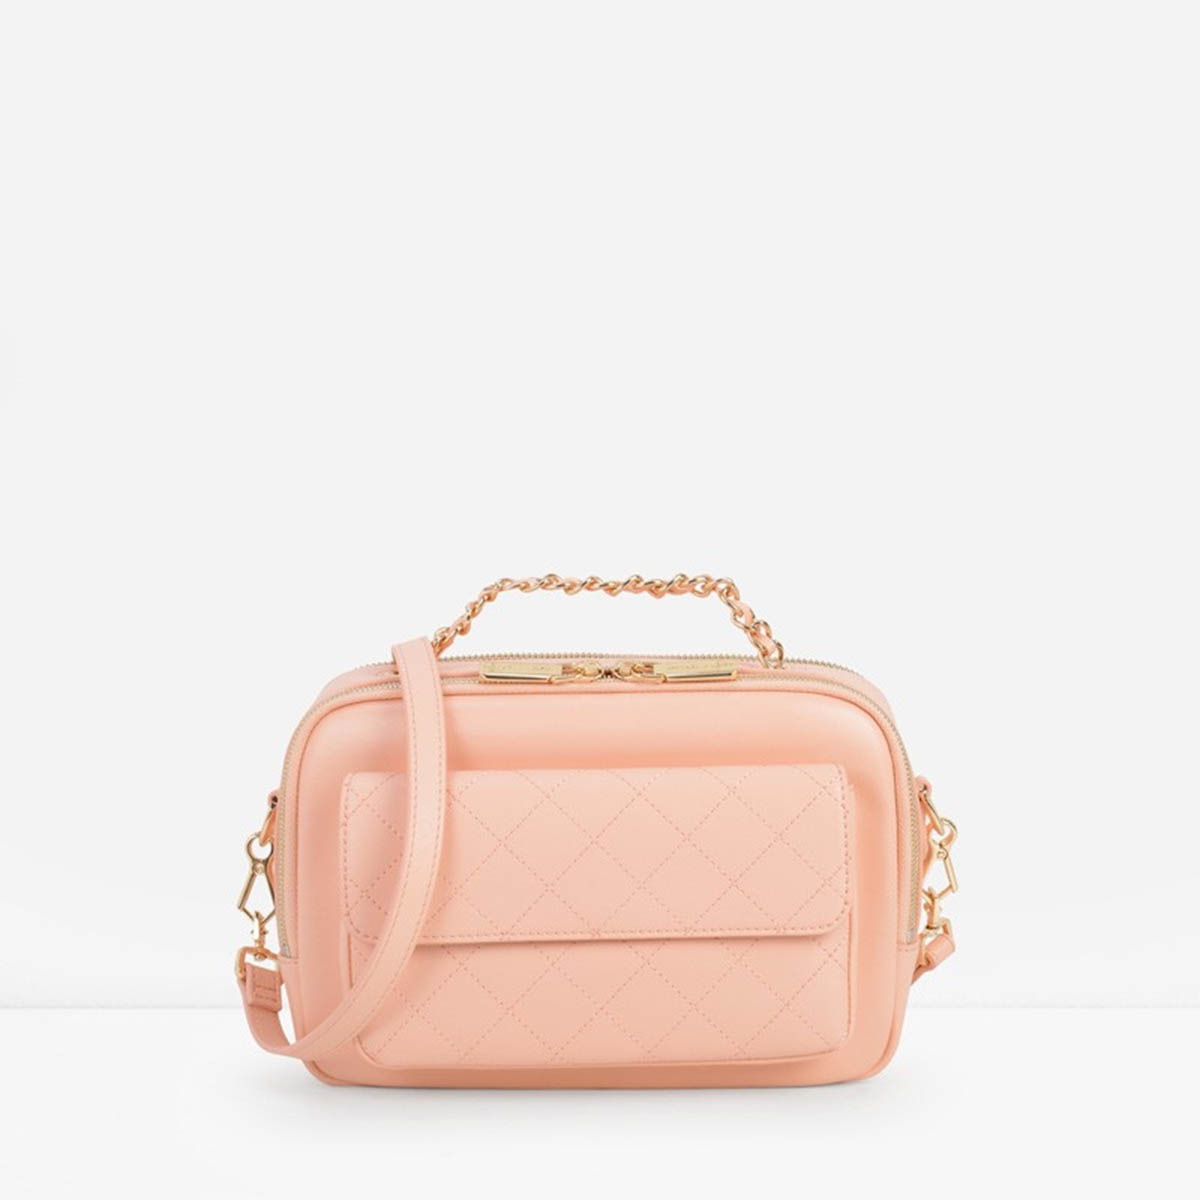 Charles keith quilted pocket crossbody peach ck2 50670391  15020903 0